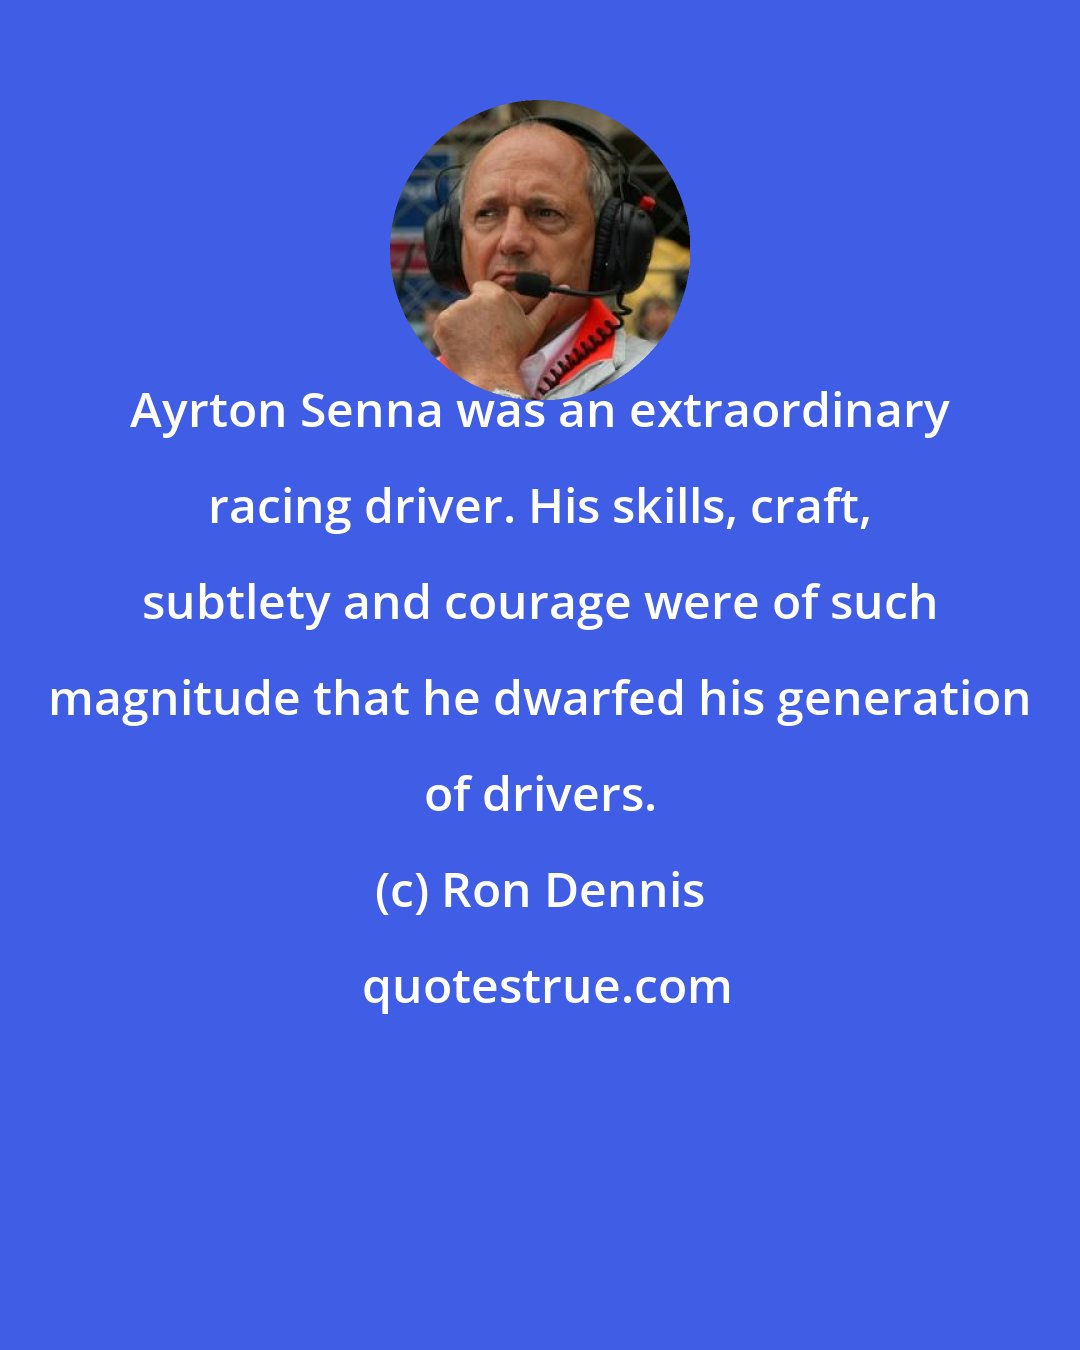 Ron Dennis: Ayrton Senna was an extraordinary racing driver. His skills, craft, subtlety and courage were of such magnitude that he dwarfed his generation of drivers.